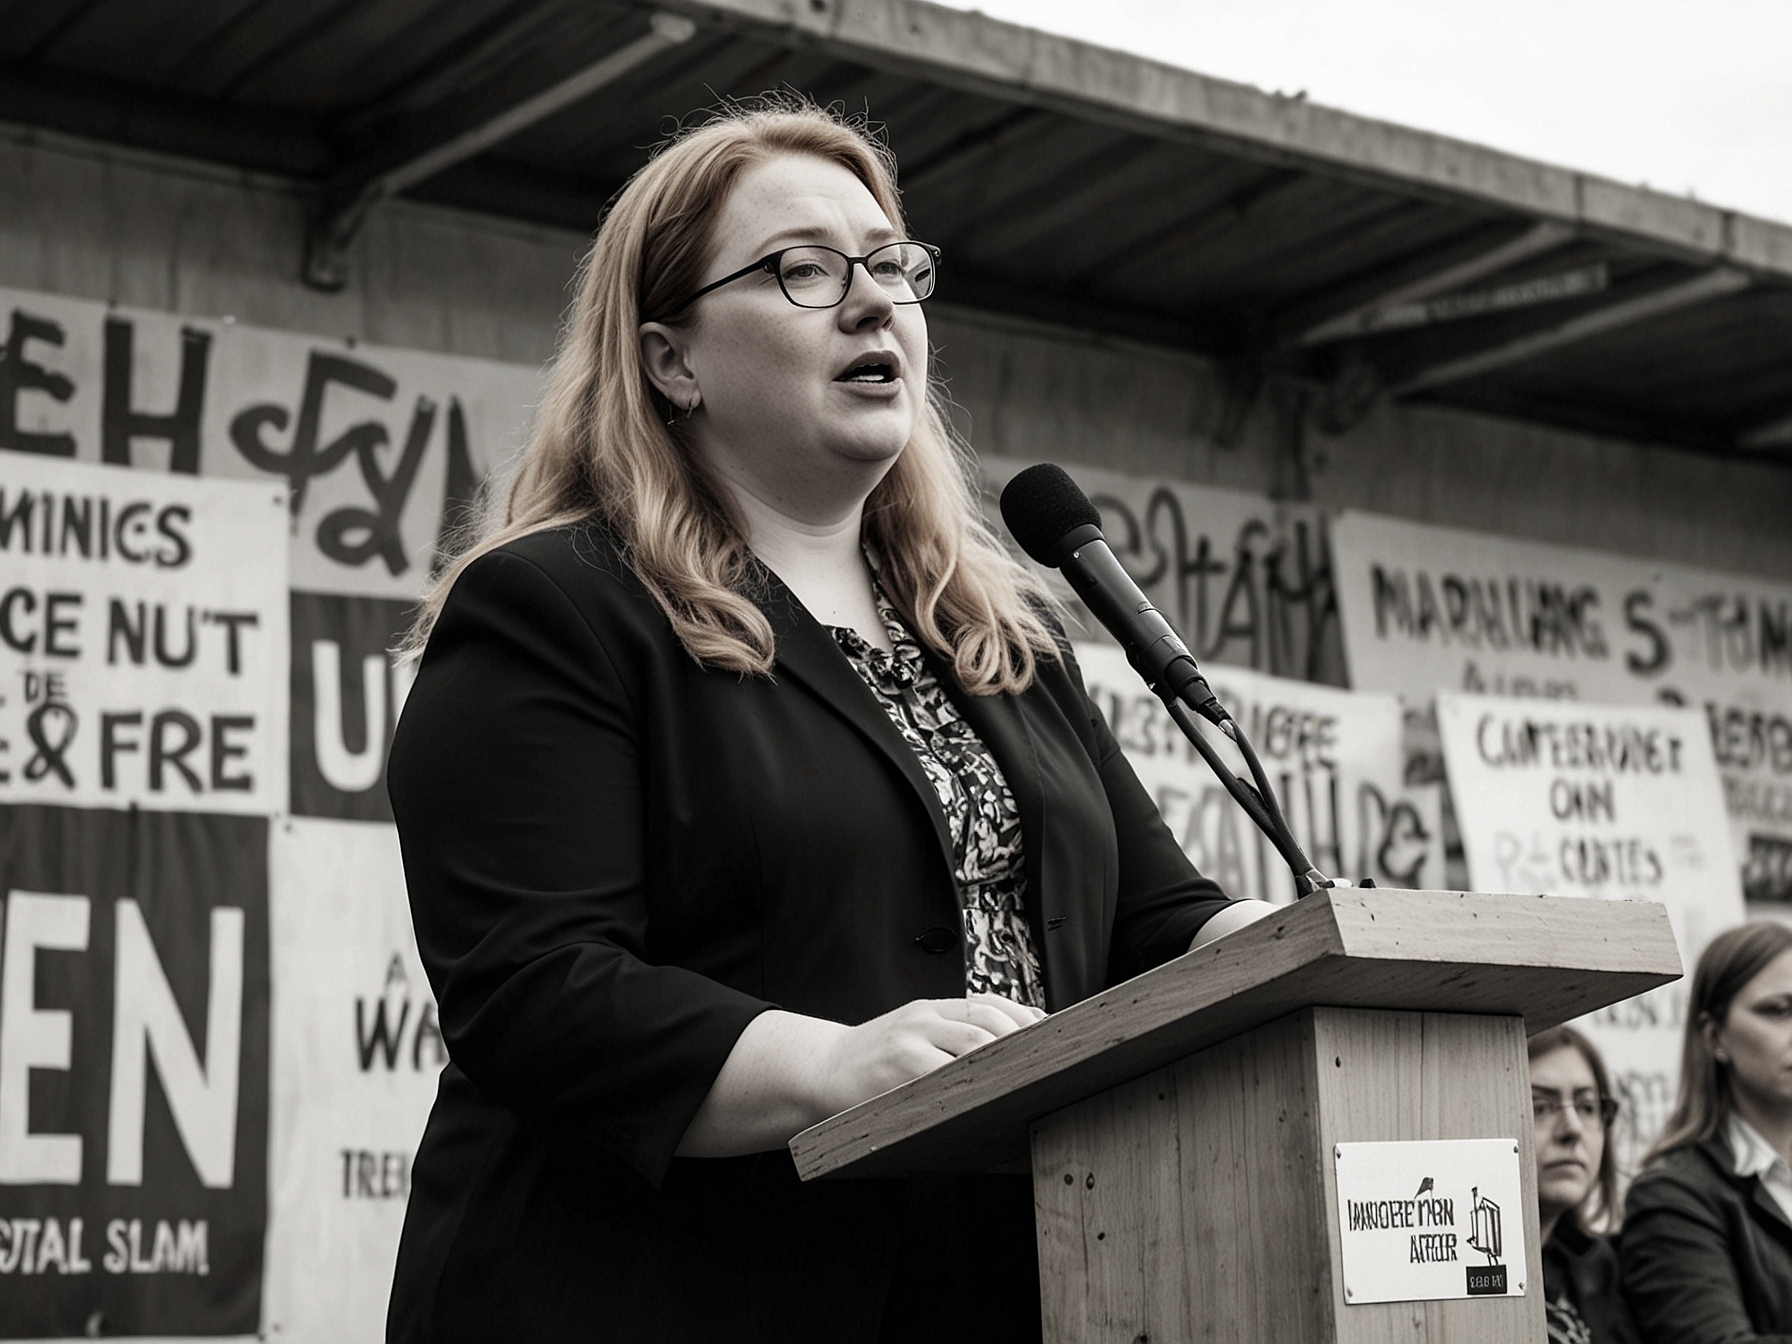 Naomi Long speaking at a rally in East Belfast, promoting her vision of social justice and inclusivity, aiming to mobilize her base and appeal to the middle ground.